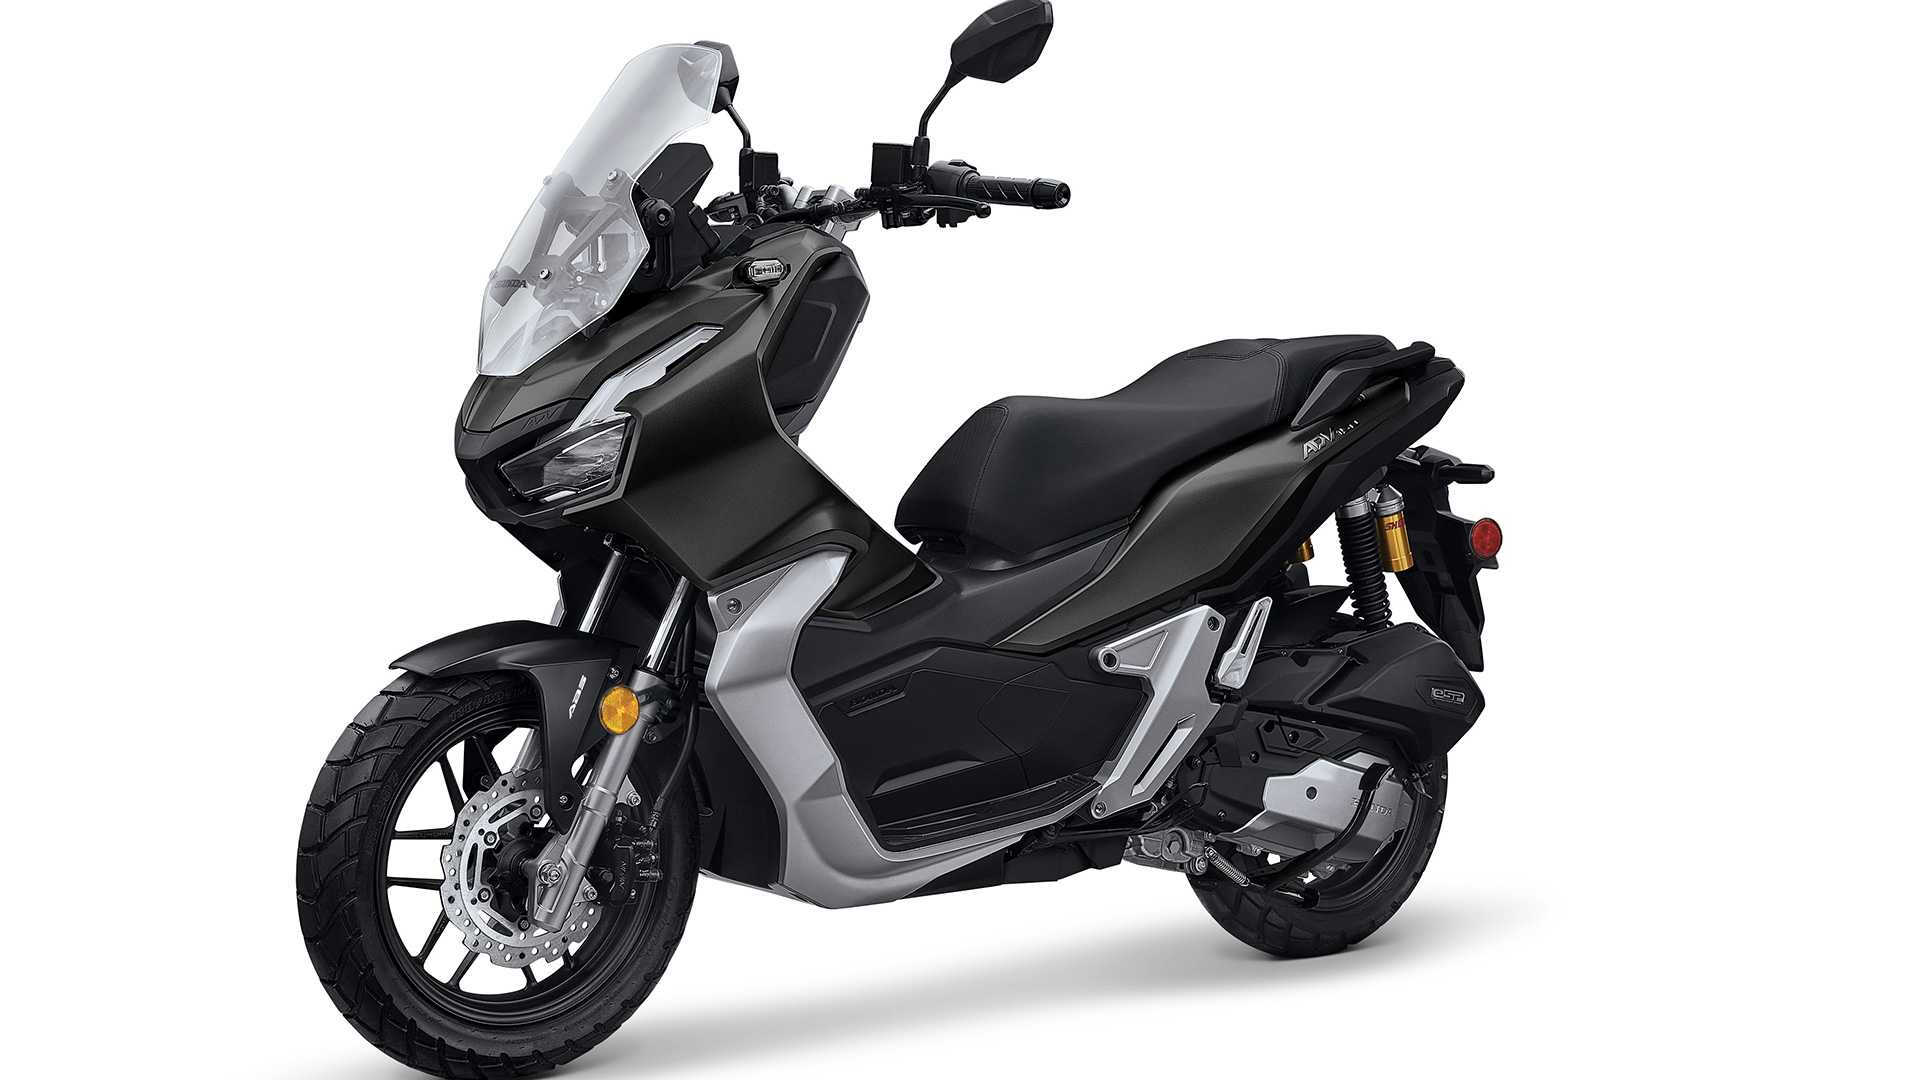 Honda ADV 150 Adventure Scooter Debuts, Priced At $4,299